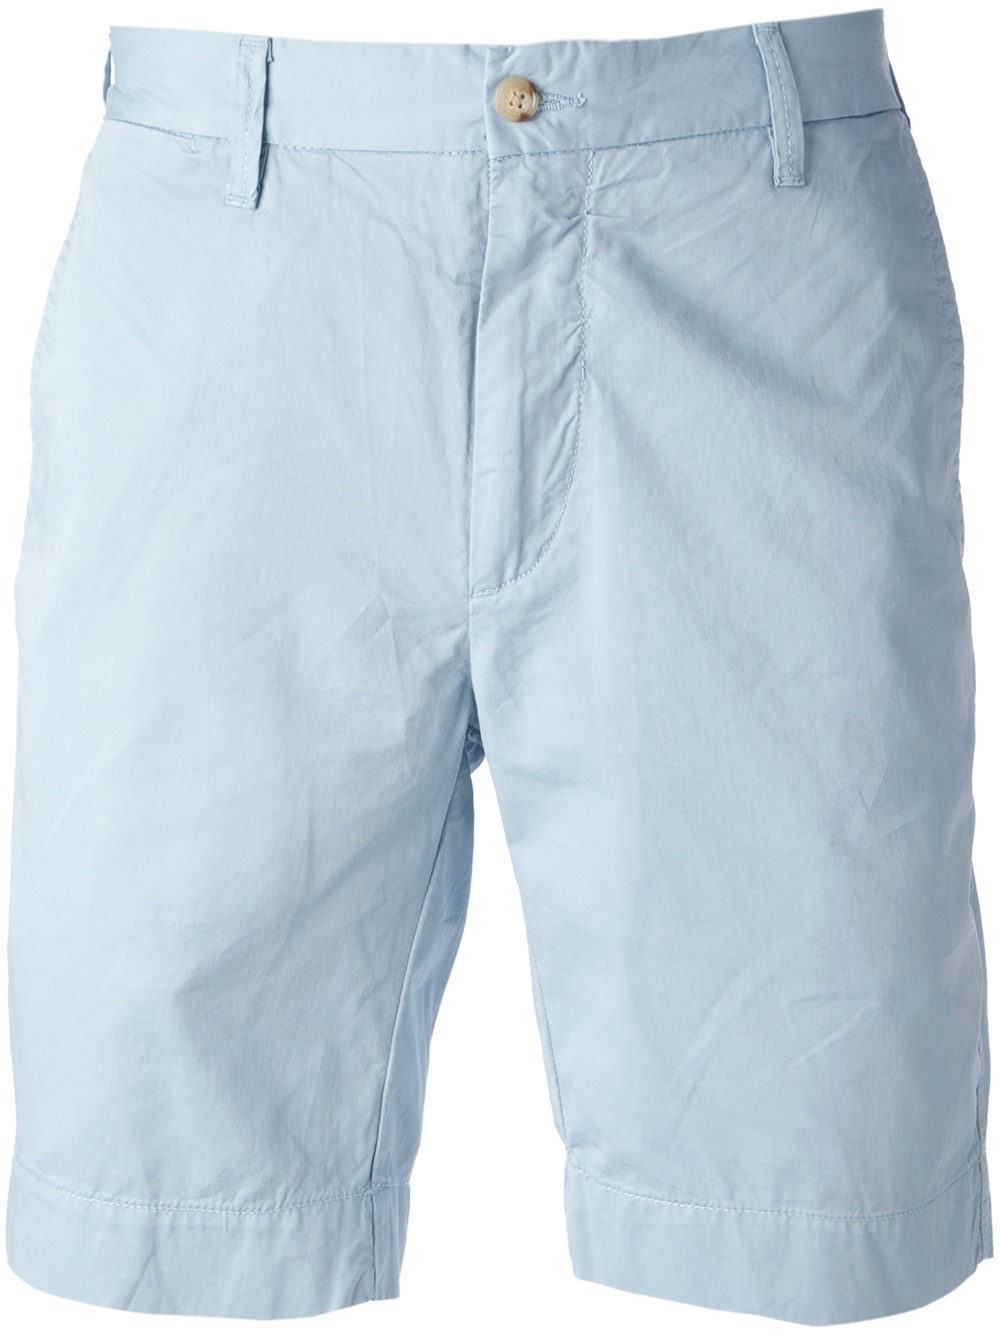 Polo Ralph Lauren Chino Shorts in Blue for Men - Lyst